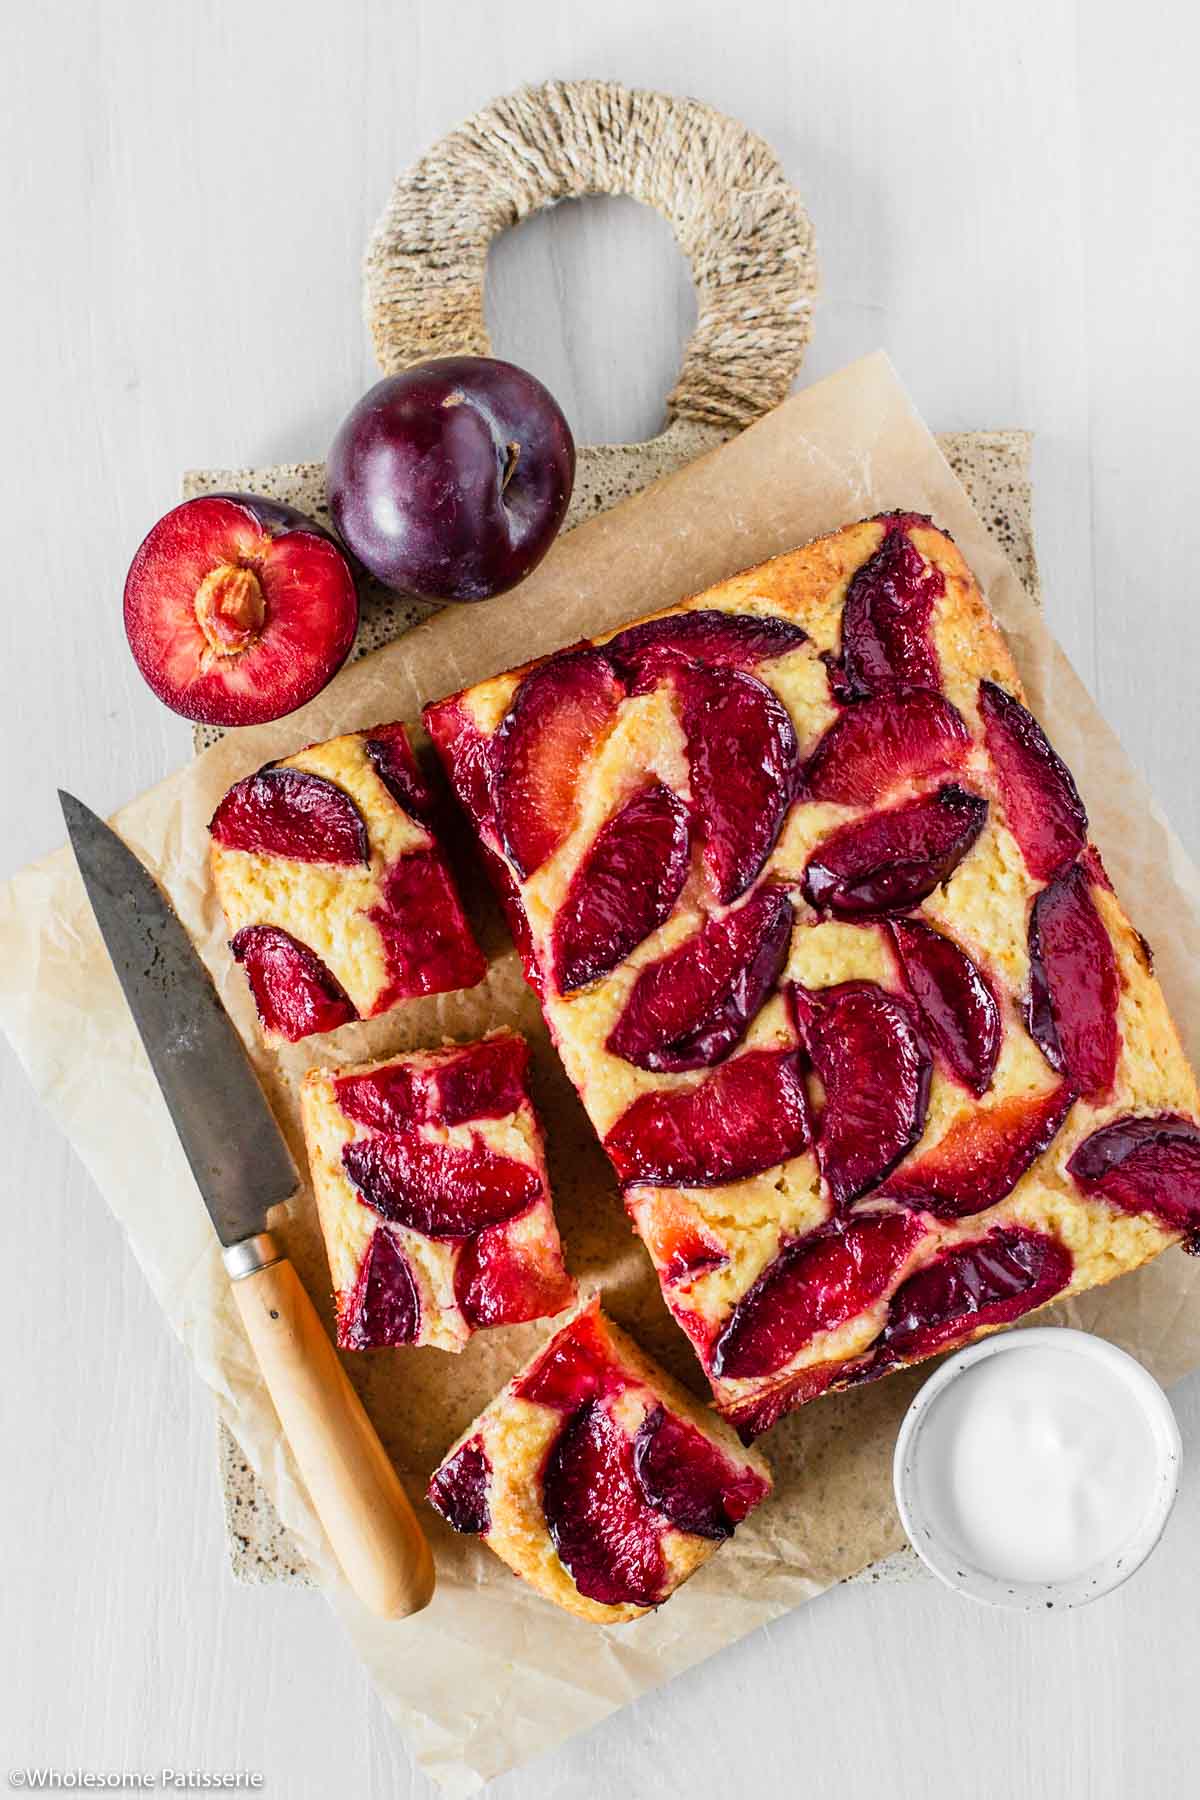 Overhead image of plum cake with slices taken out